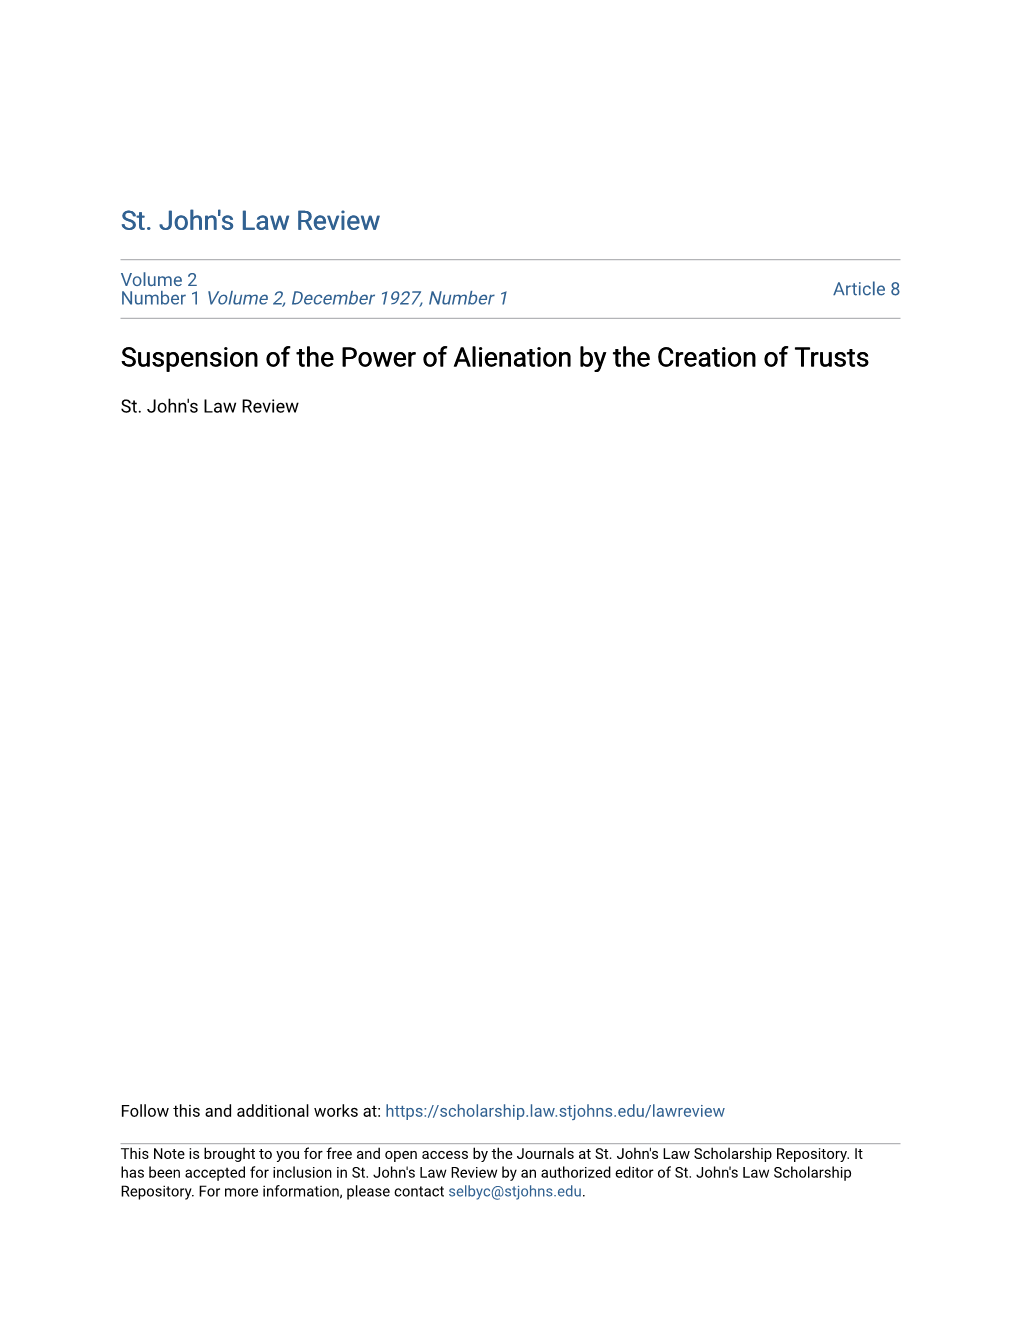 Suspension of the Power of Alienation by the Creation of Trusts